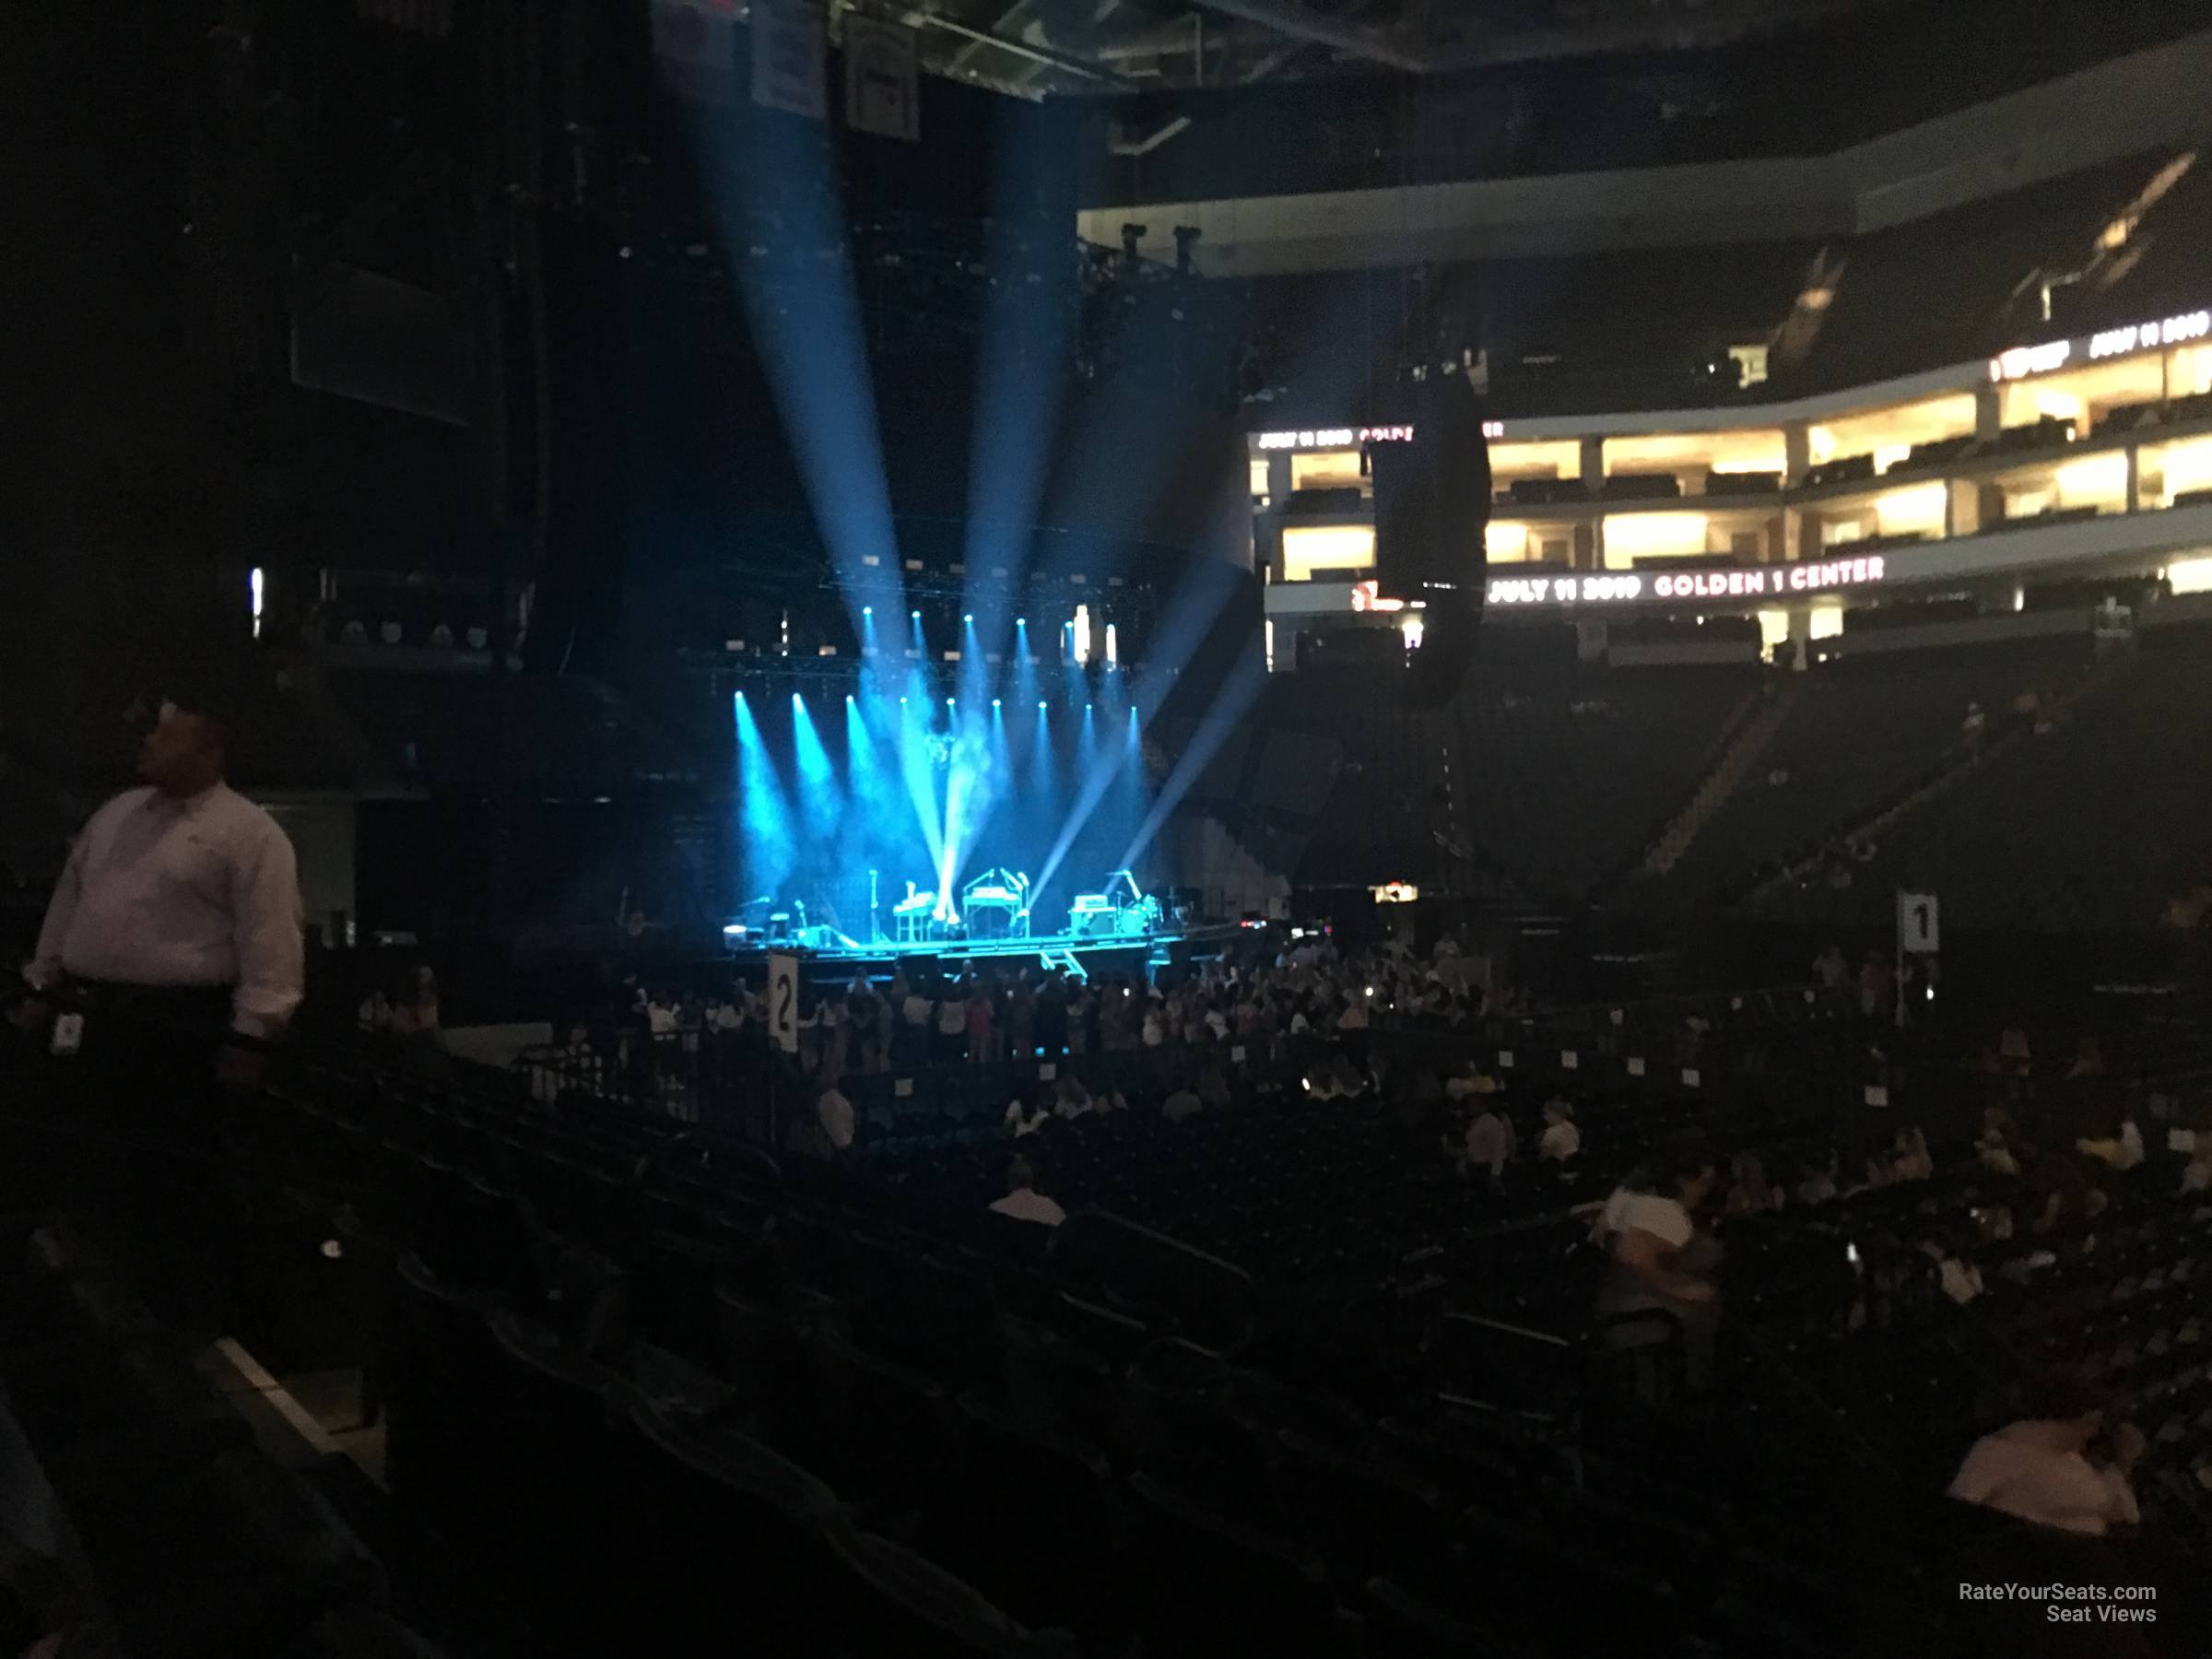 Section 119 at Golden 1 Center for Concerts